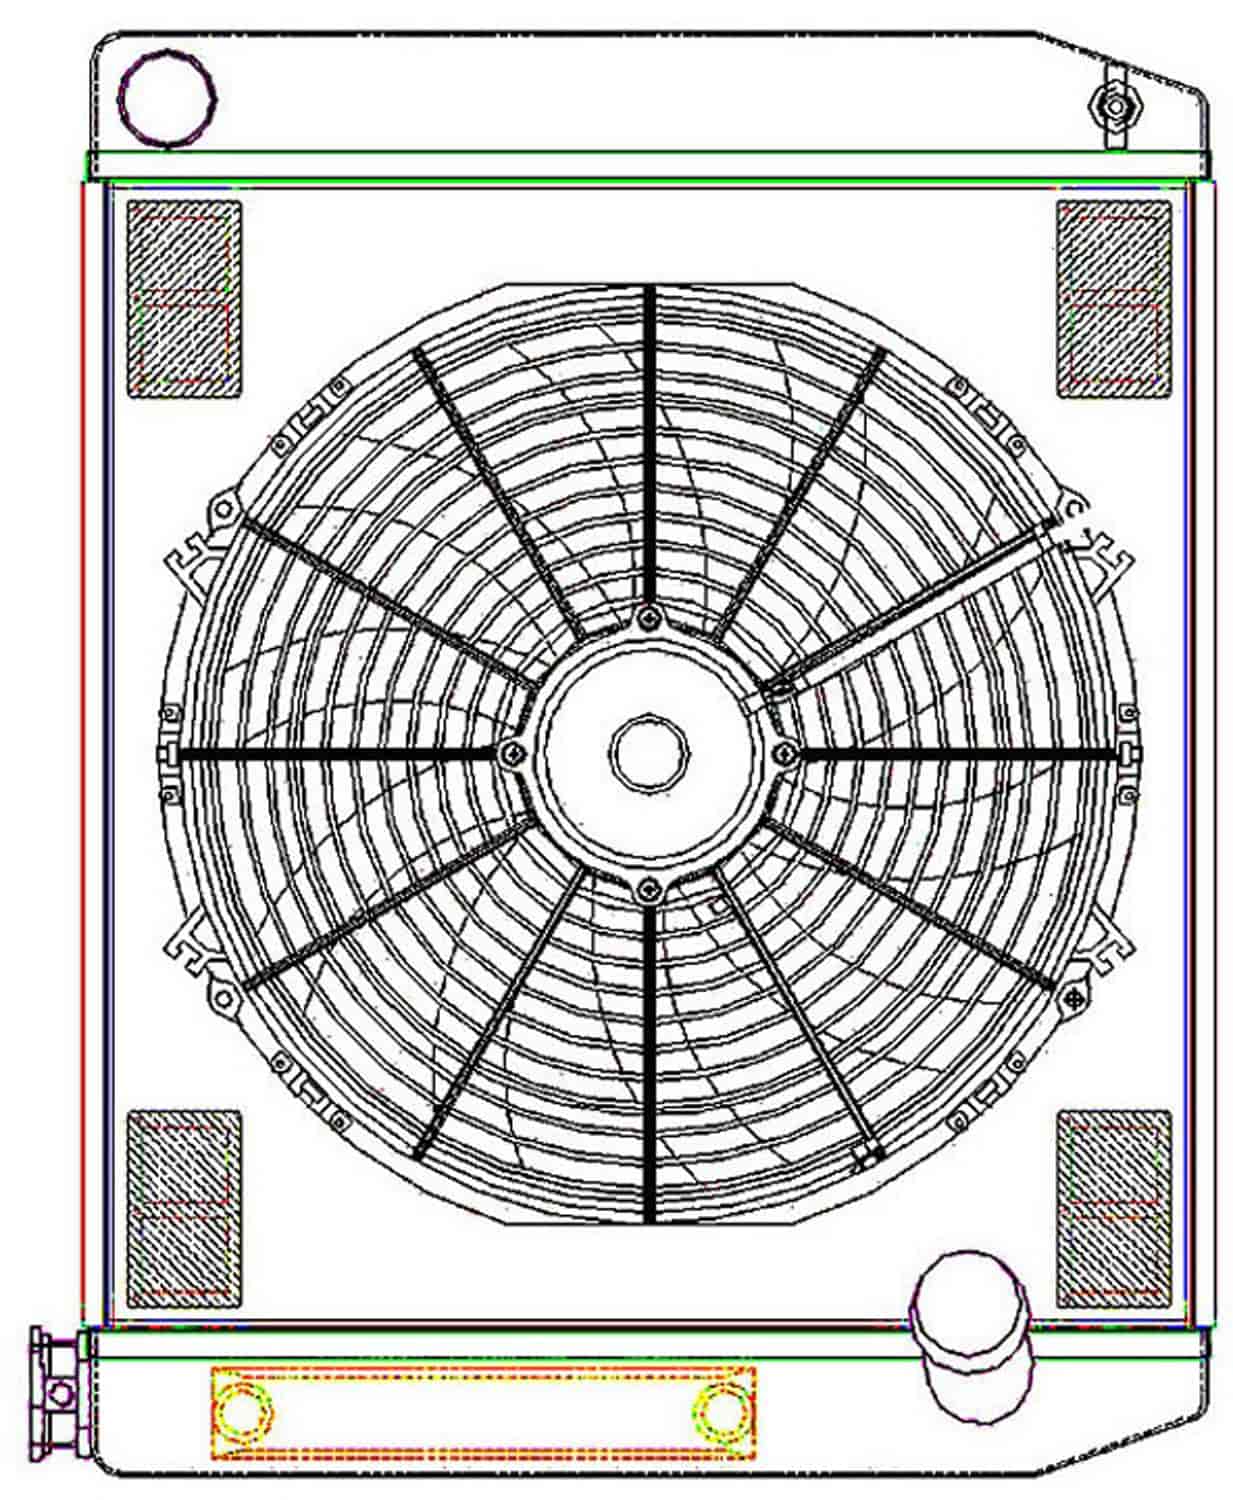 ClassicCool ComboUnit Universal Fit Radiator and Fan Single Pass Crossflow Design 24" x 19" with Transmission Cooler